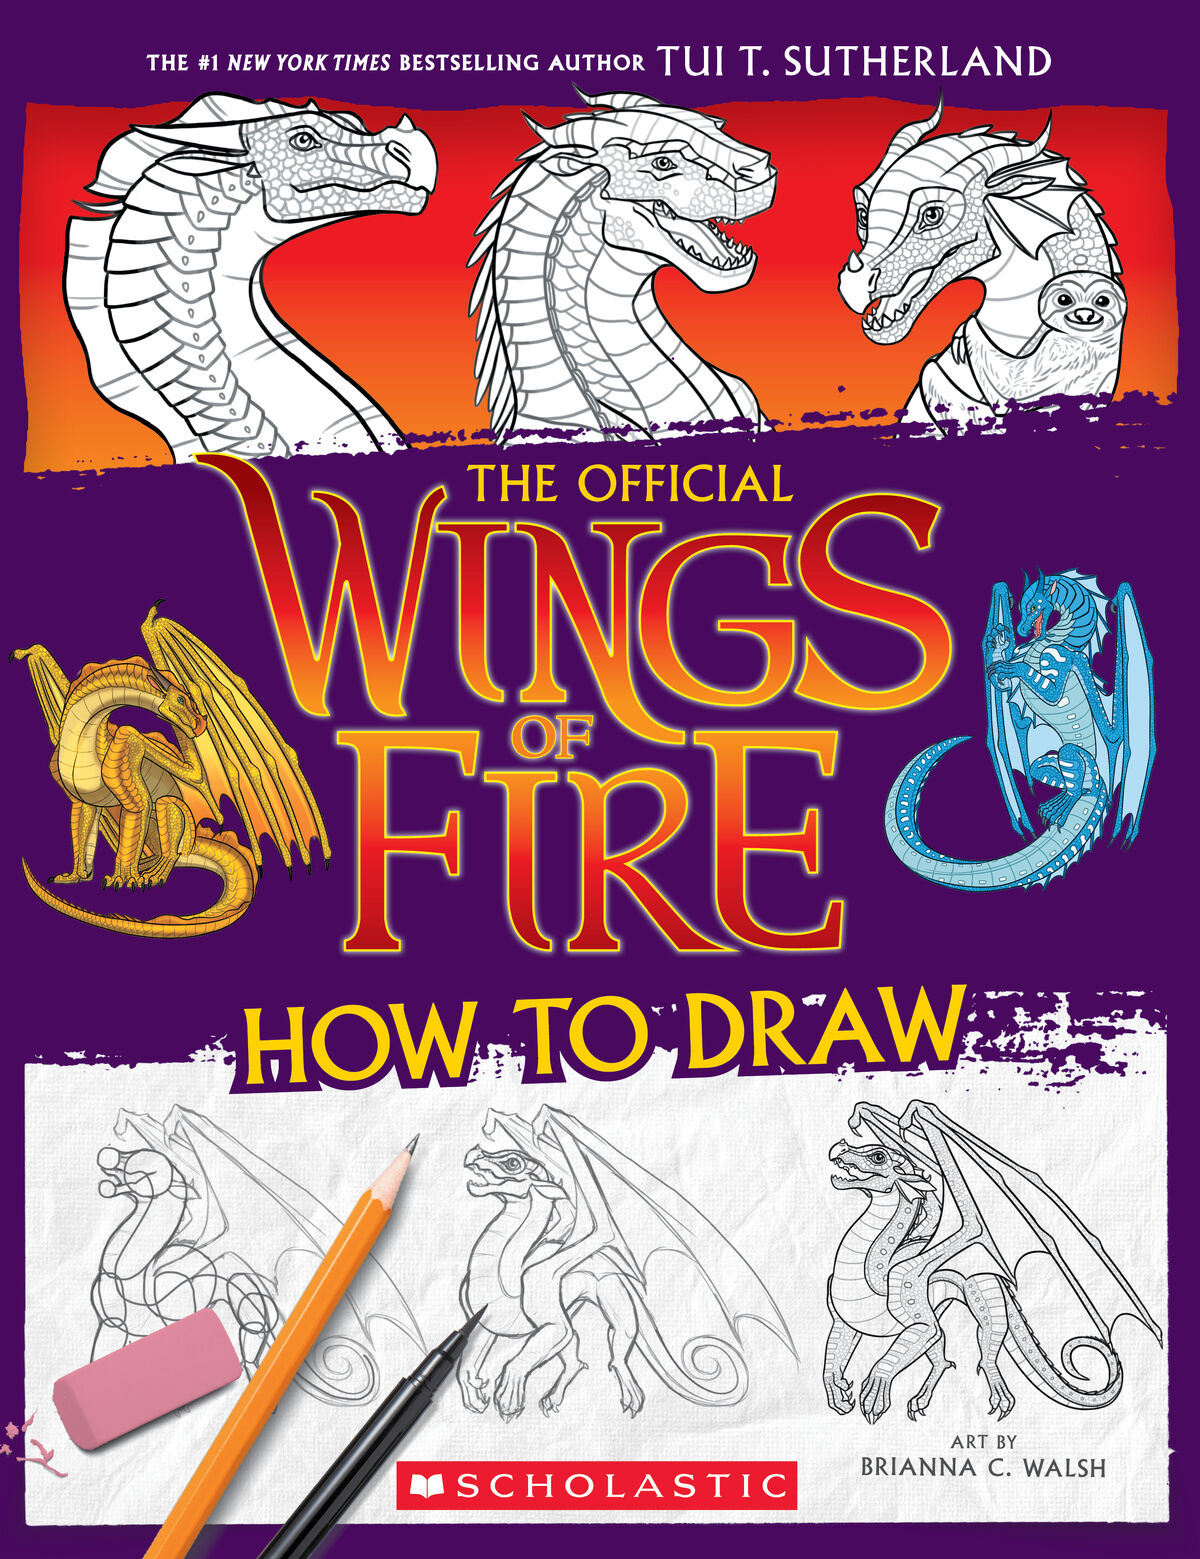 How to Draw, Wings of Fire Wiki